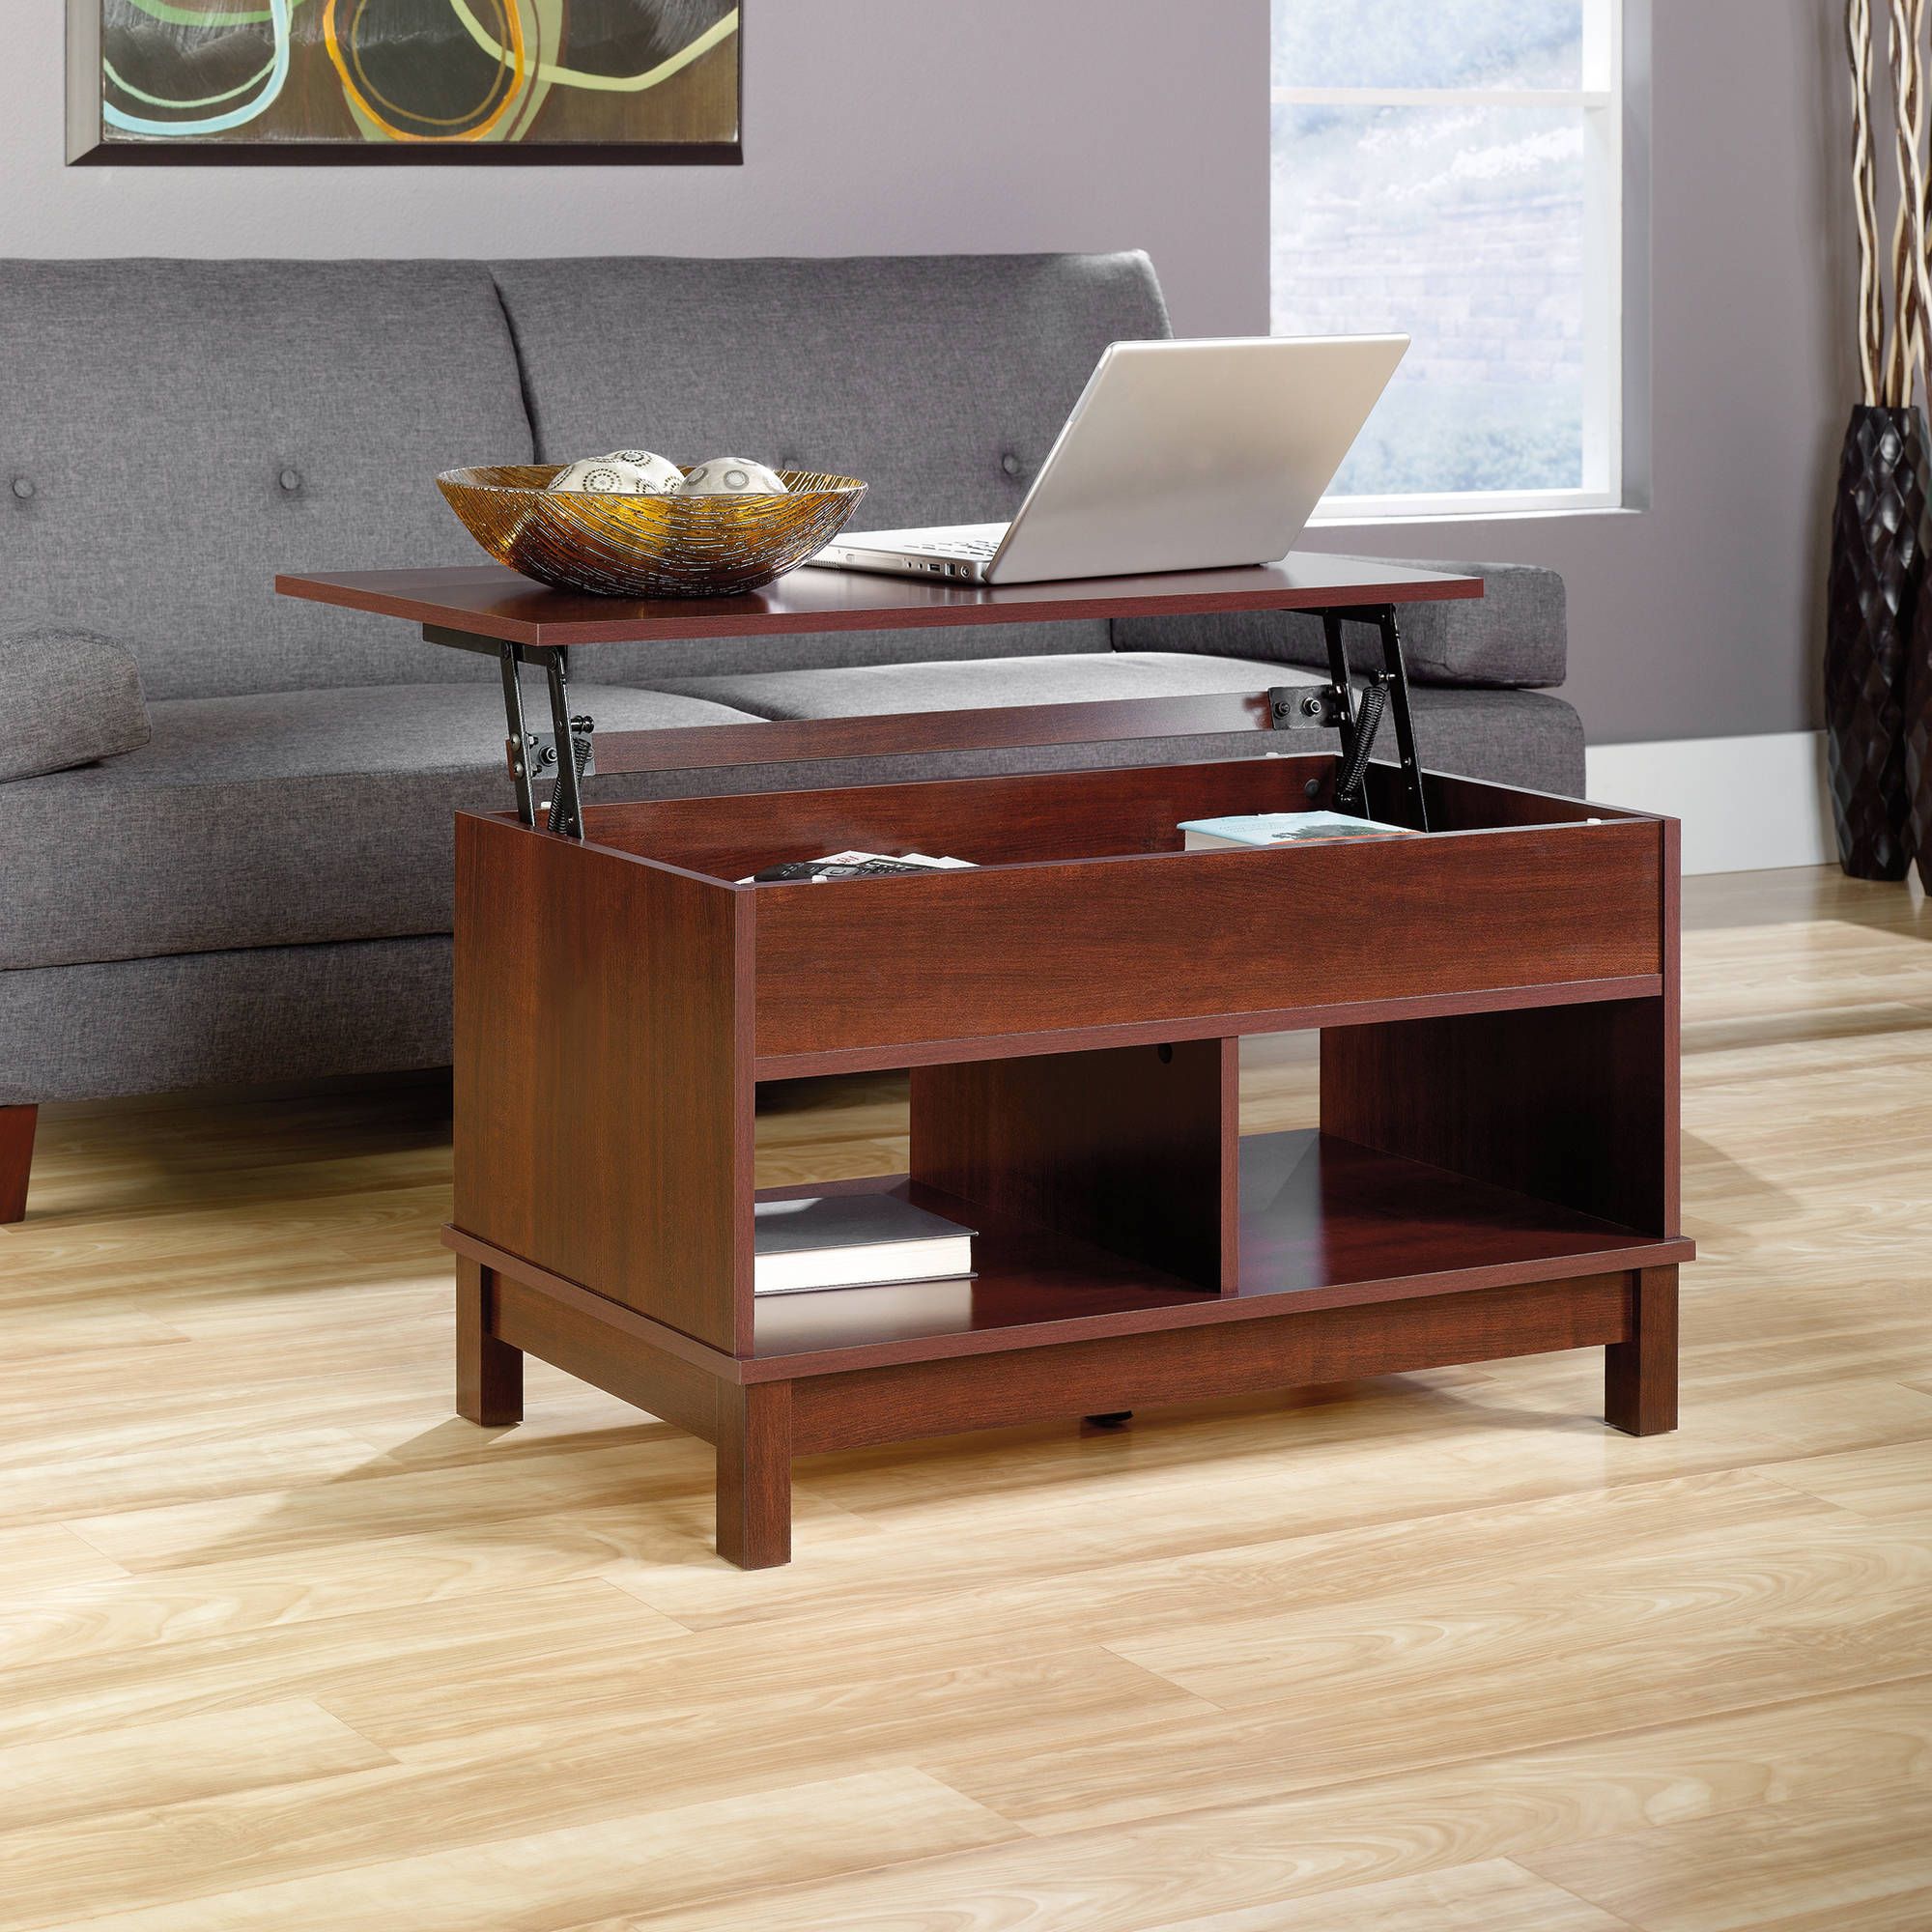 Lift Top Coffee Tables With Storage With Regard To Lift Top Coffee Tables With Storage Drawers (View 16 of 20)